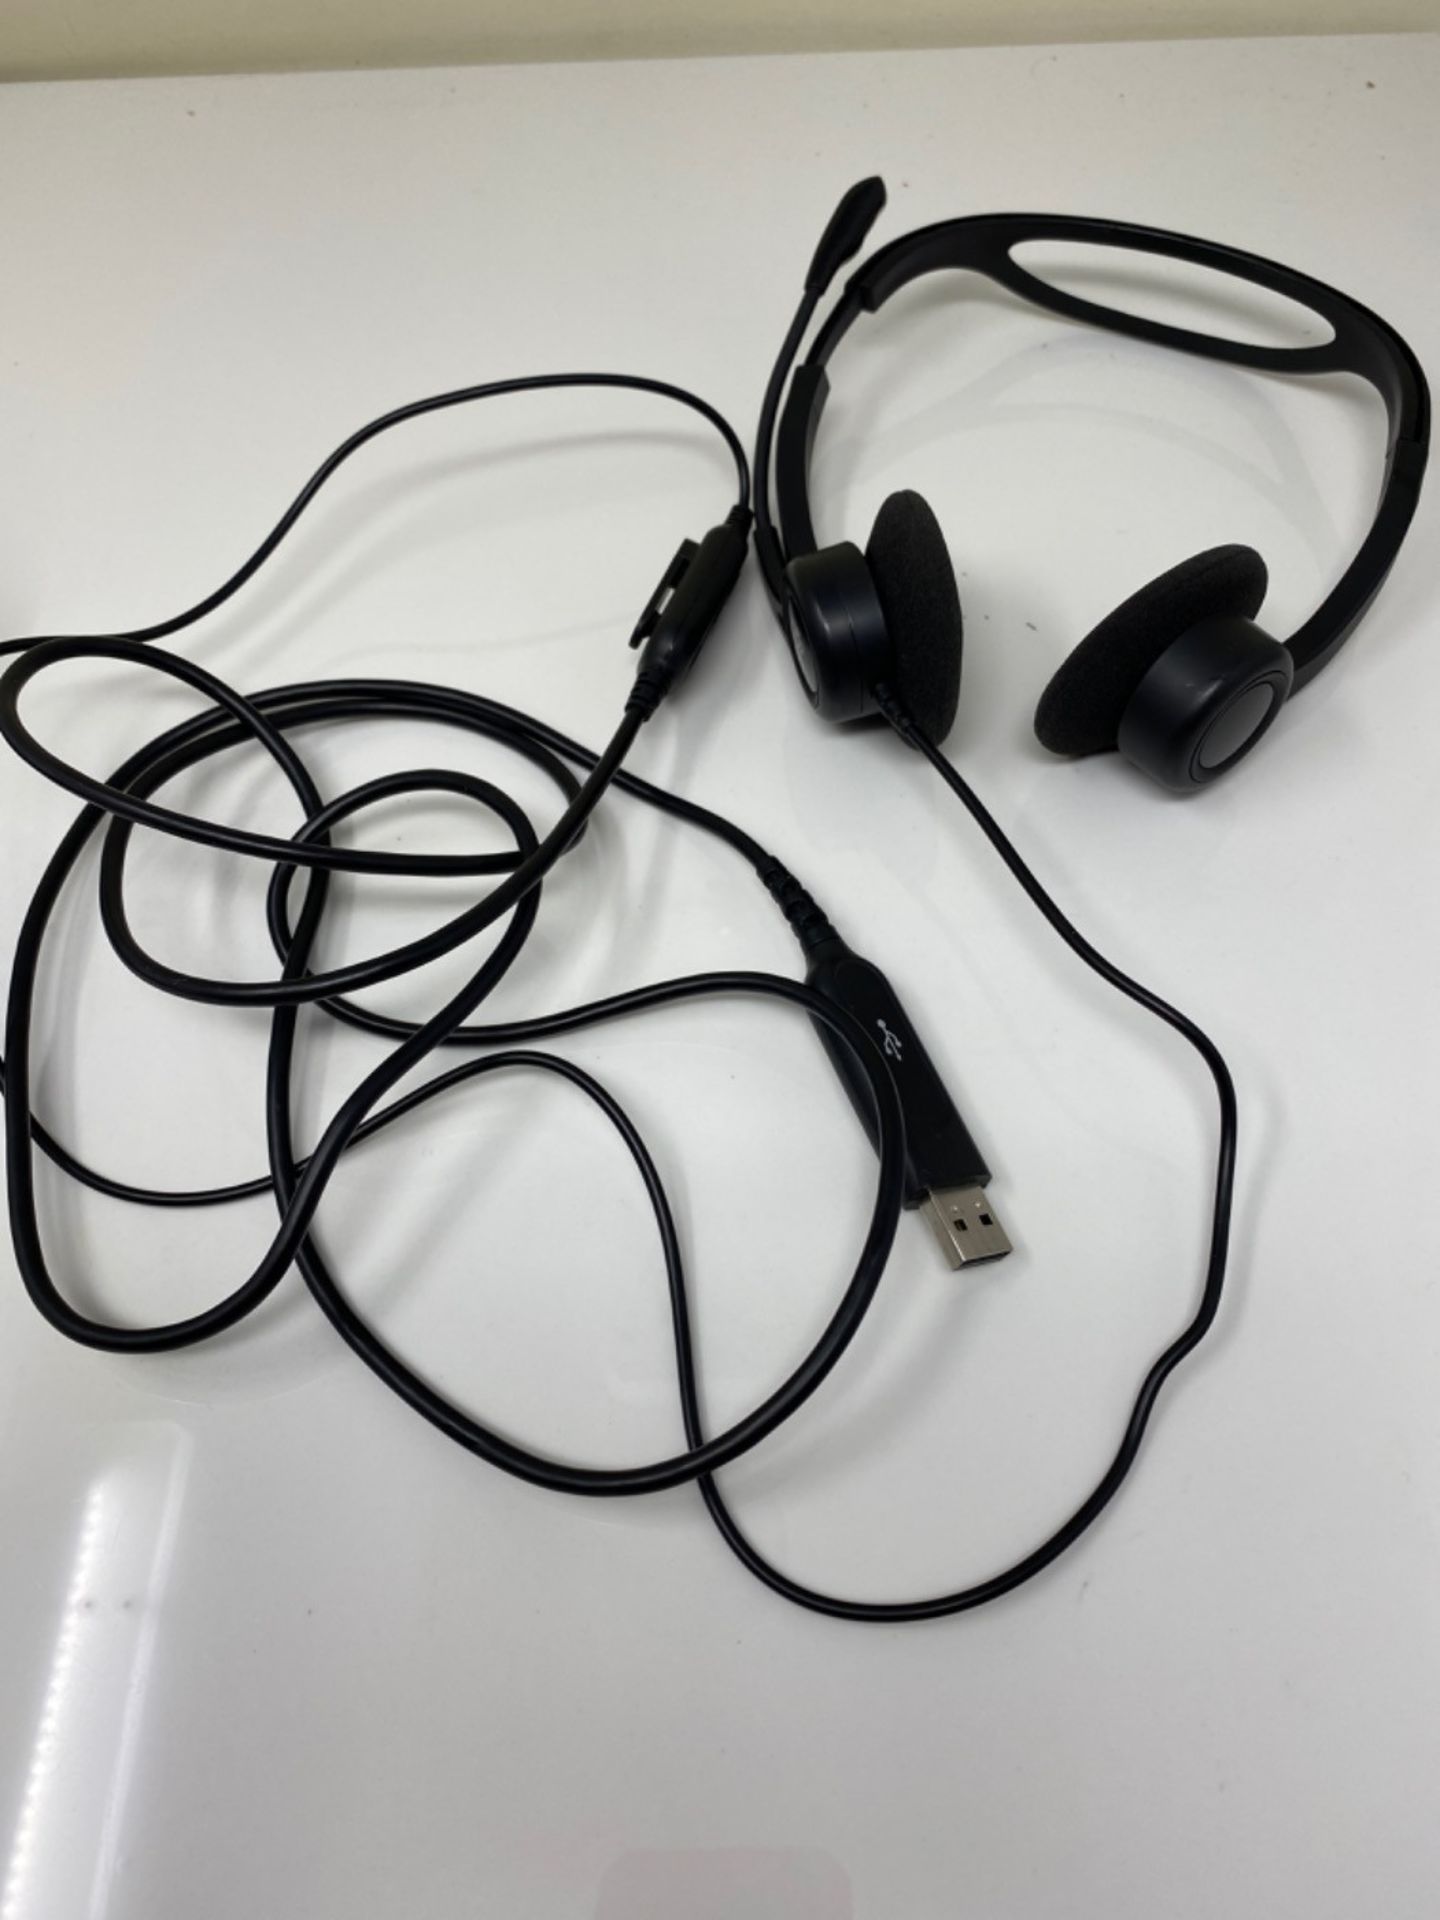 Logitech 960 Wired Headset, Stereo Headphones with Noise-Cancelling Microphone, USB, L - Image 2 of 2